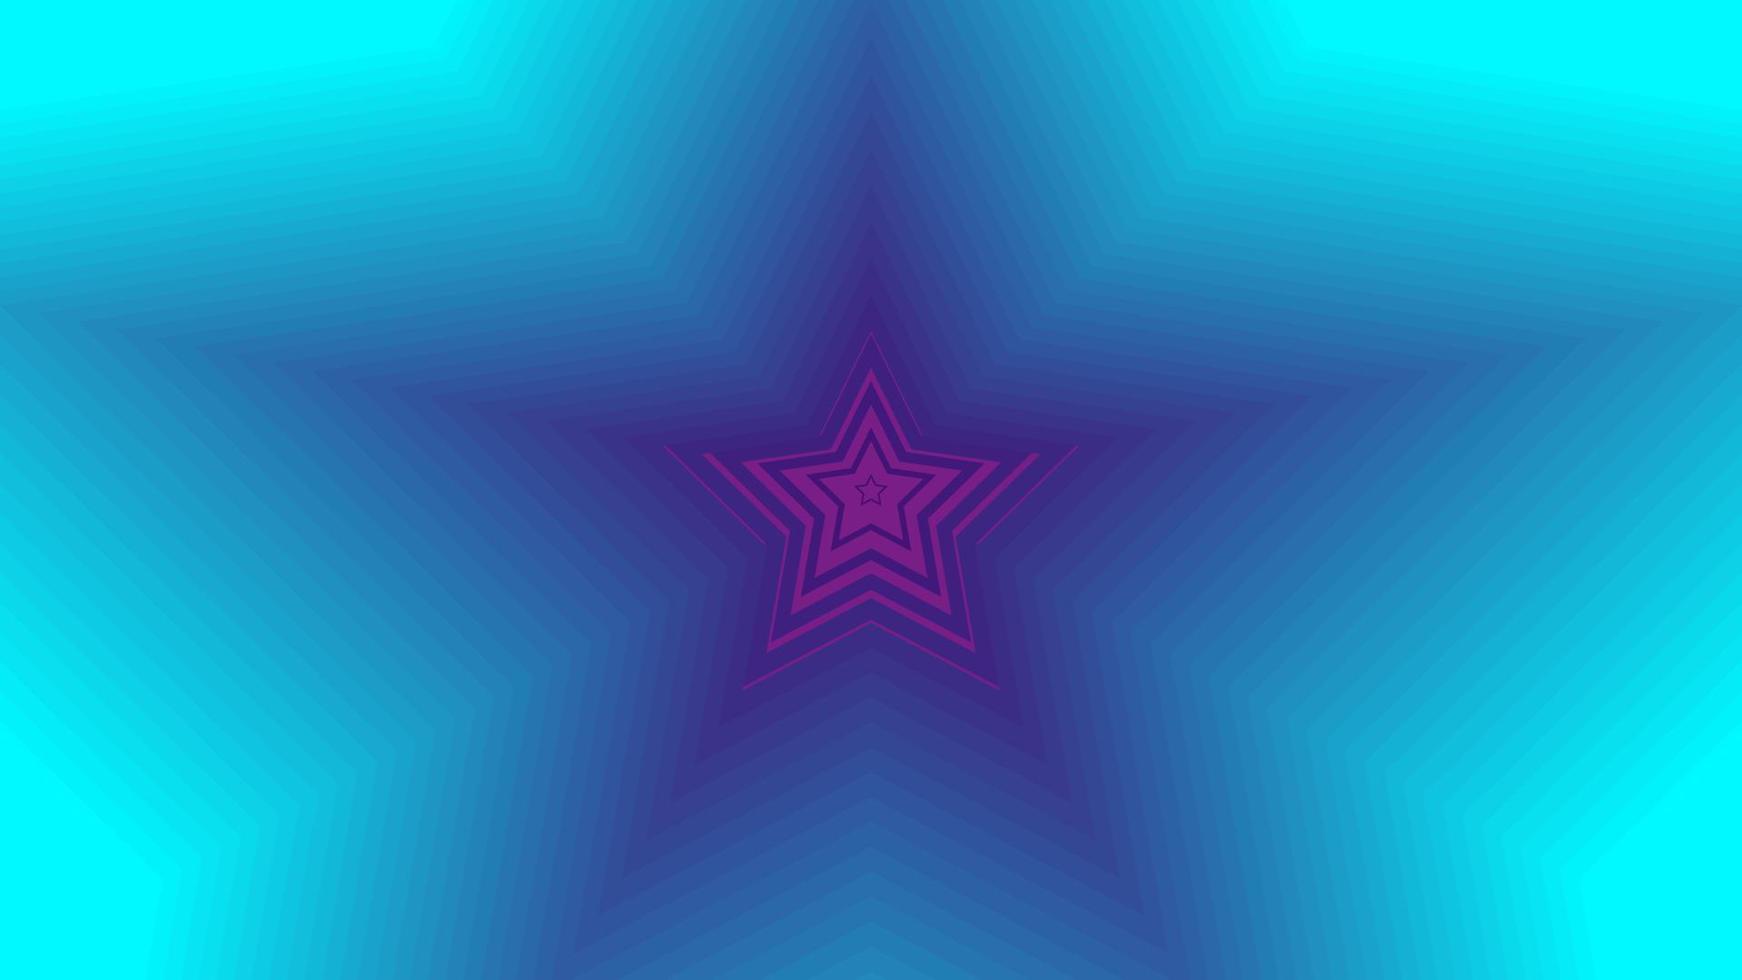 purple star in the center Background image in blue purple shadow gradation vector